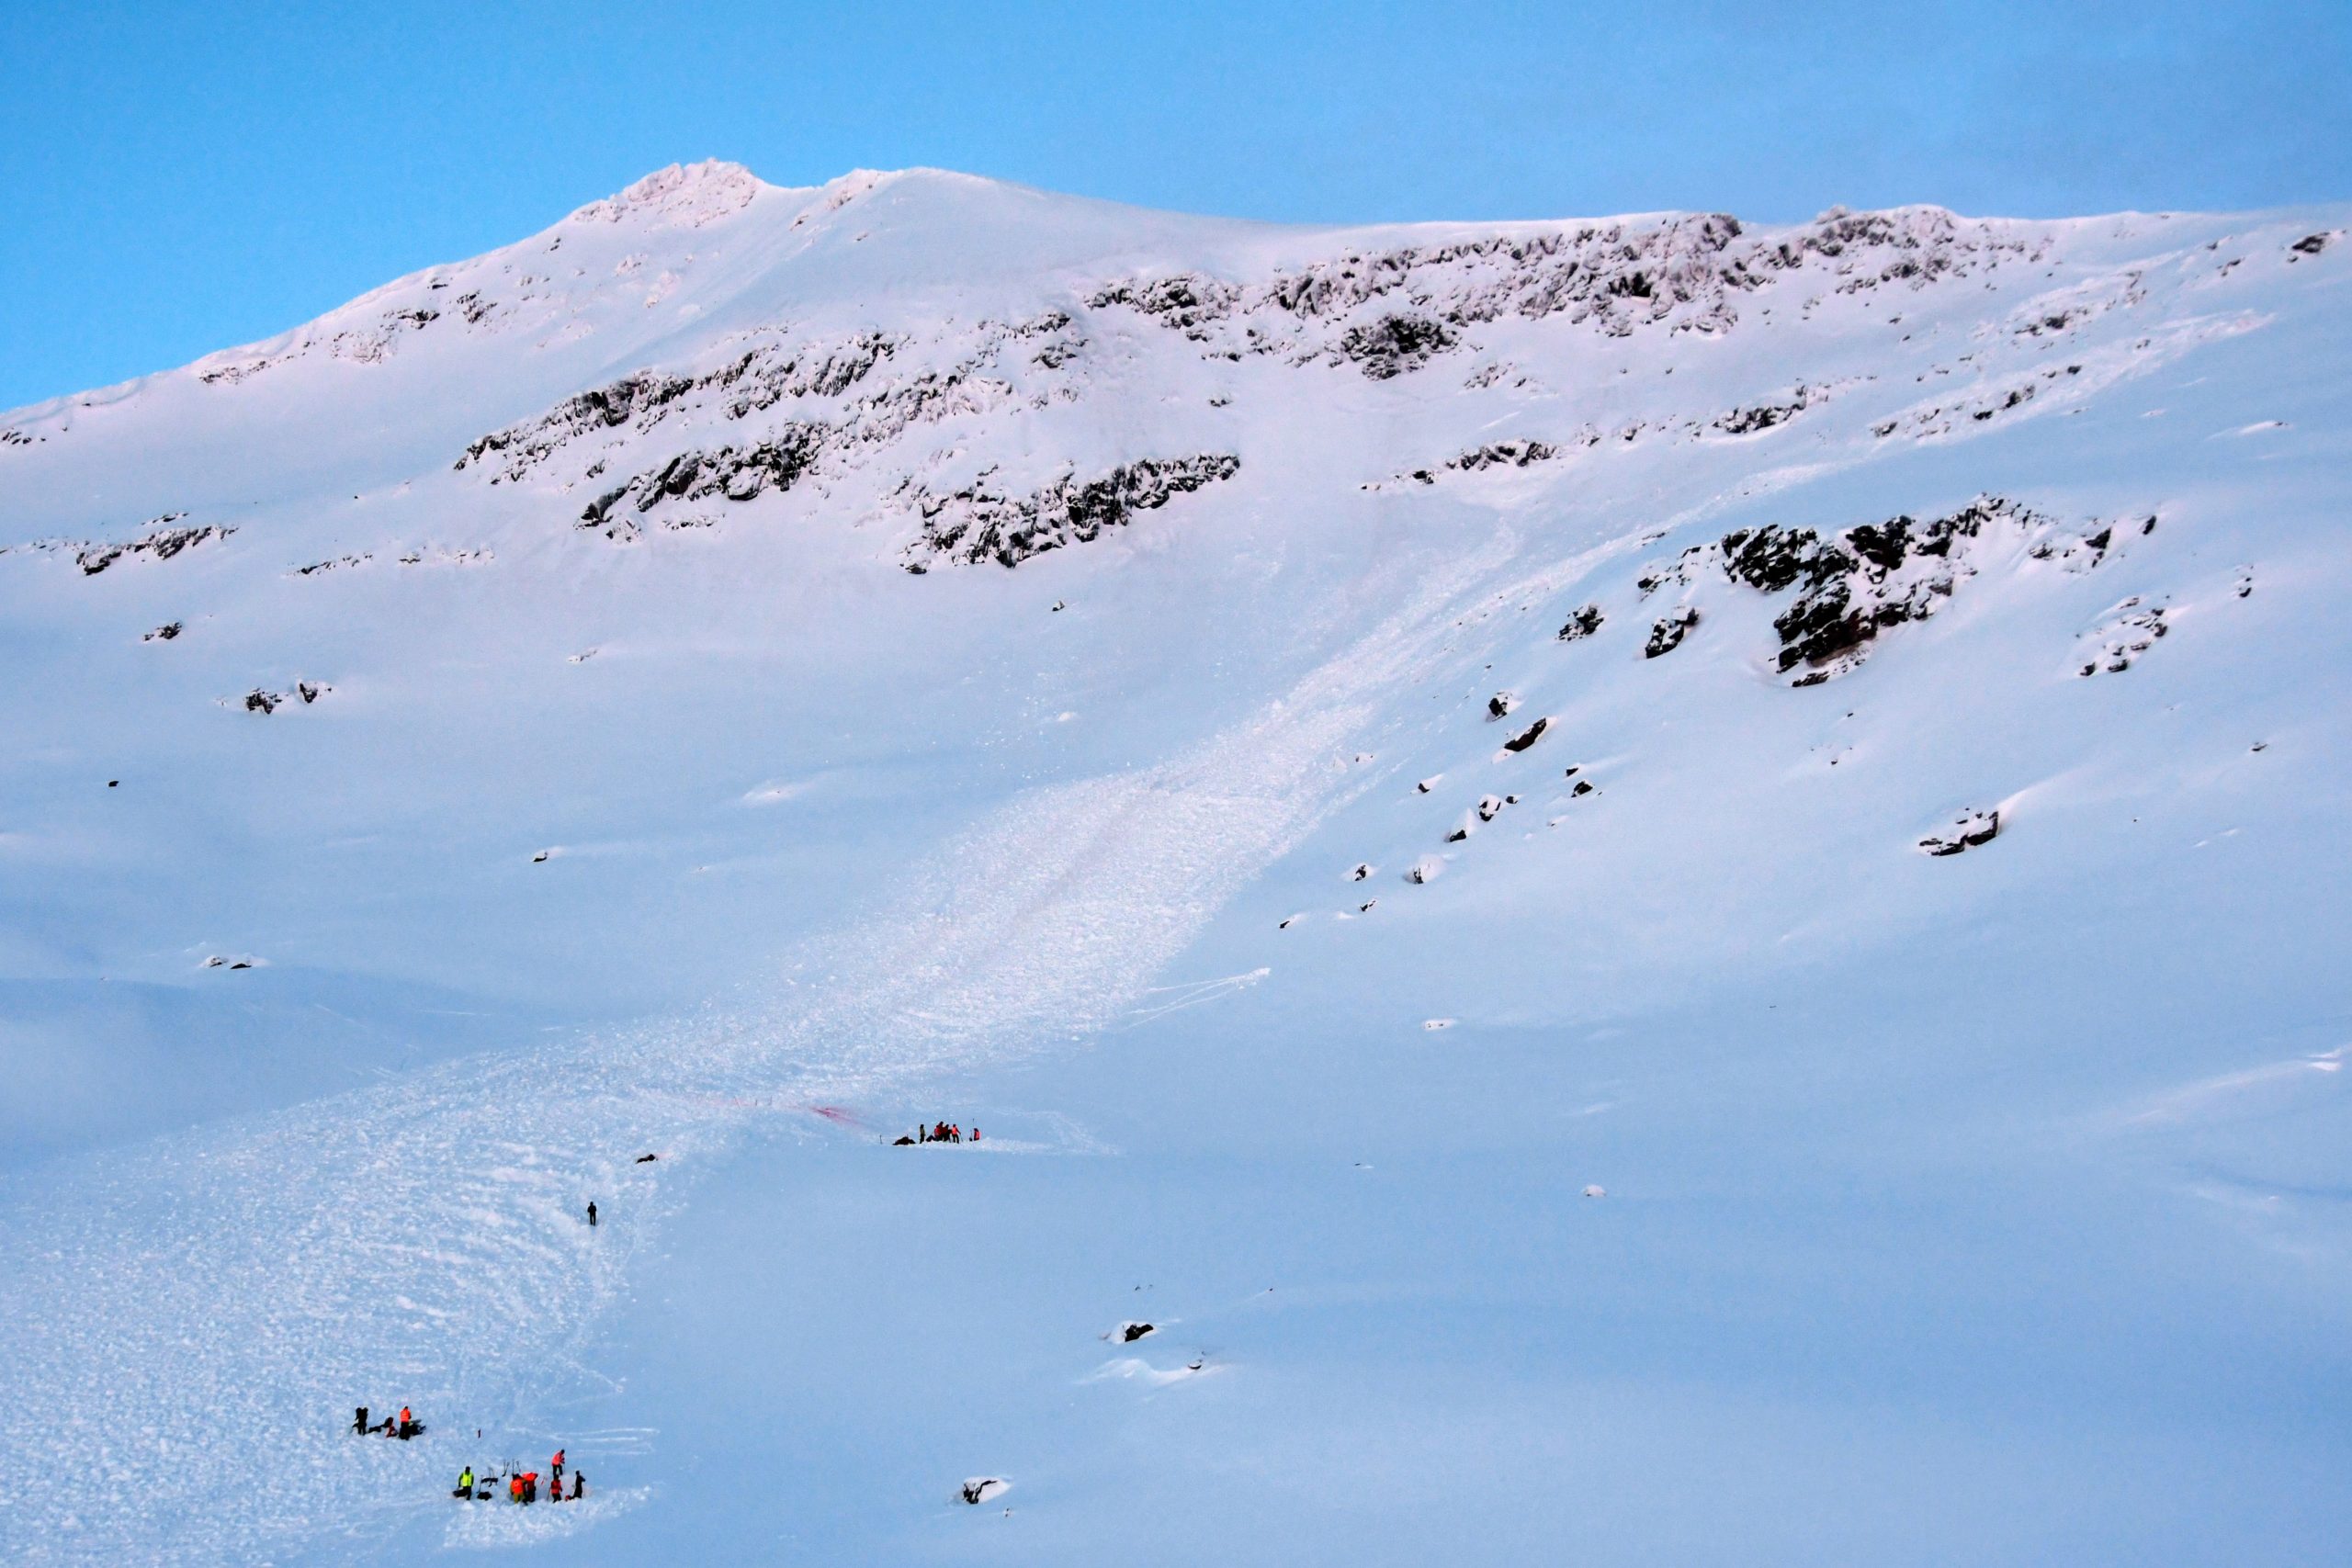 Police and volunteers of the Red Cross take part in the operations to recover the bodies of the tourists who were buried in snow during an avalanche in the Blåbærfjellet mountain, on January 17, 2019 near Nordkjosbotn in Tamokdalen valley, northern Norway. - Four Finnish and Swedish cross-country skiers in their thirties were caught in an avalanche on January 2, 2019. The body of one of four skiers has been recovered the day before and the three others have been located. (Photo by Rune Stoltz BERTINUSSEN / NTB scanpix / AFP) / Norway OUT (Photo credit should read RUNE STOLTZ BERTINUSSEN/AFP via Getty Images)